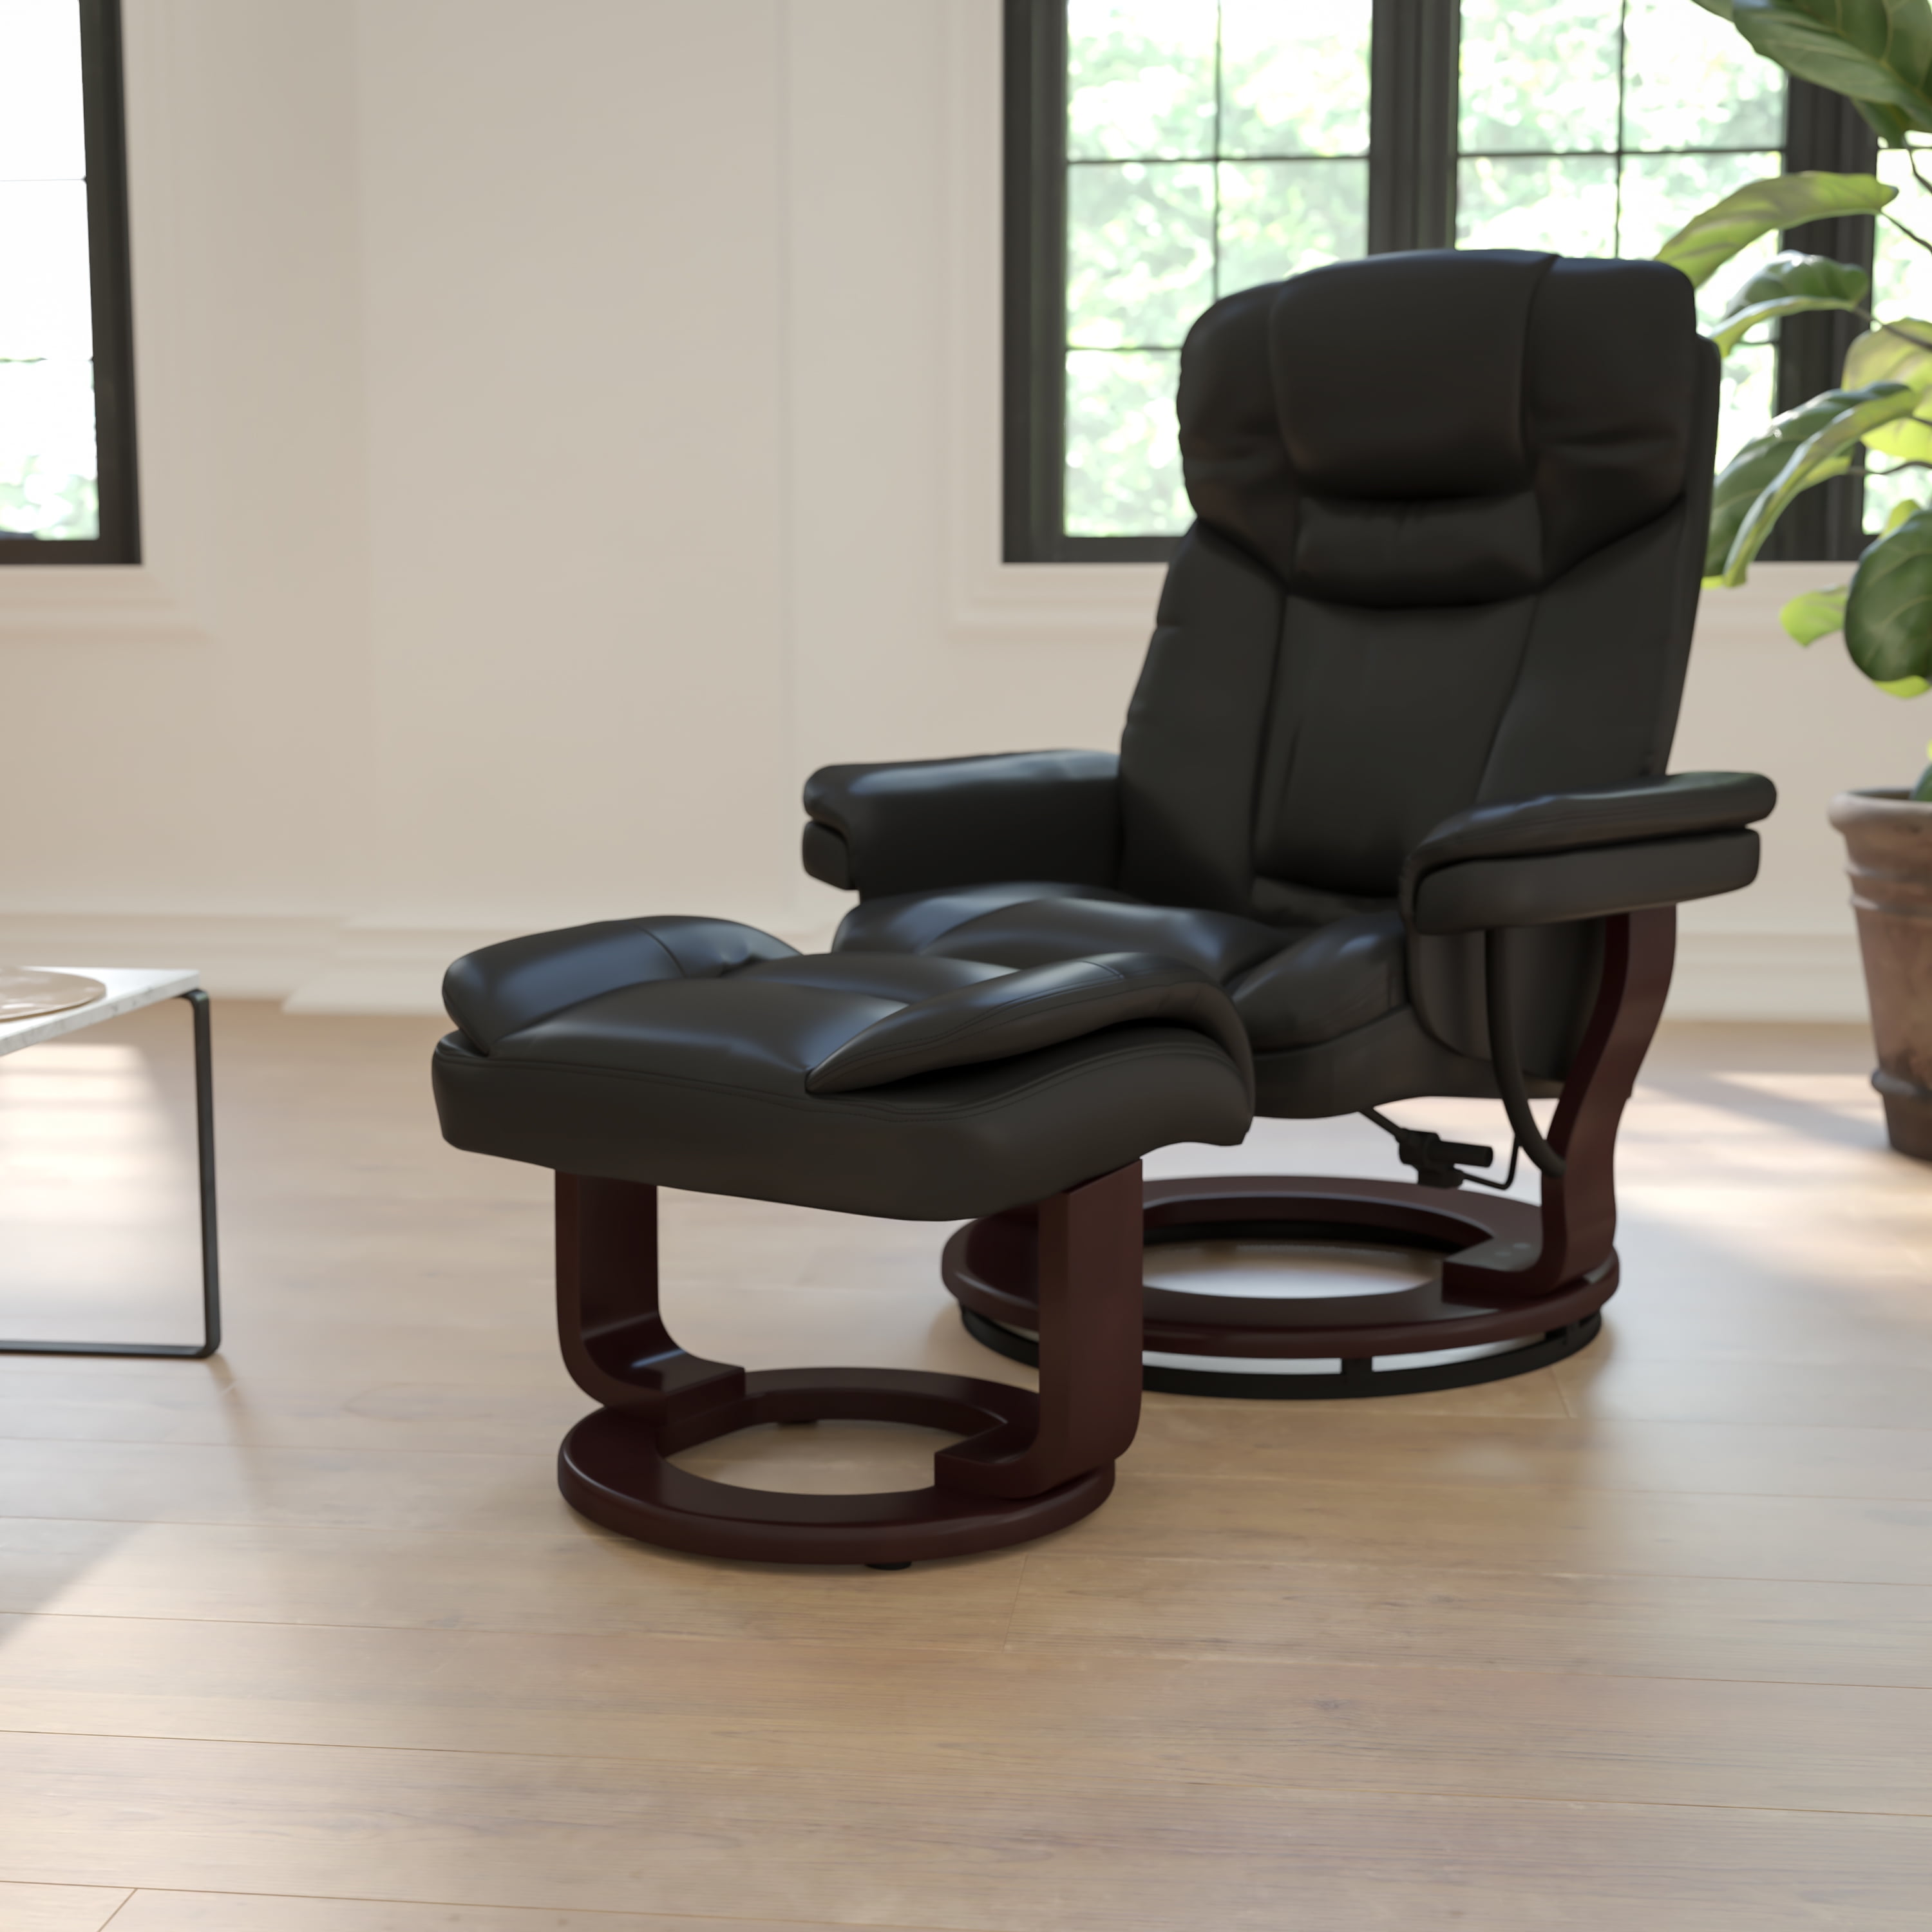 Flash Furniture Contemporary Multi-Position Recliner and Curved Ottoman with Swivel Mahogany Wood Base in Black LeatherSoft - Walmart.com